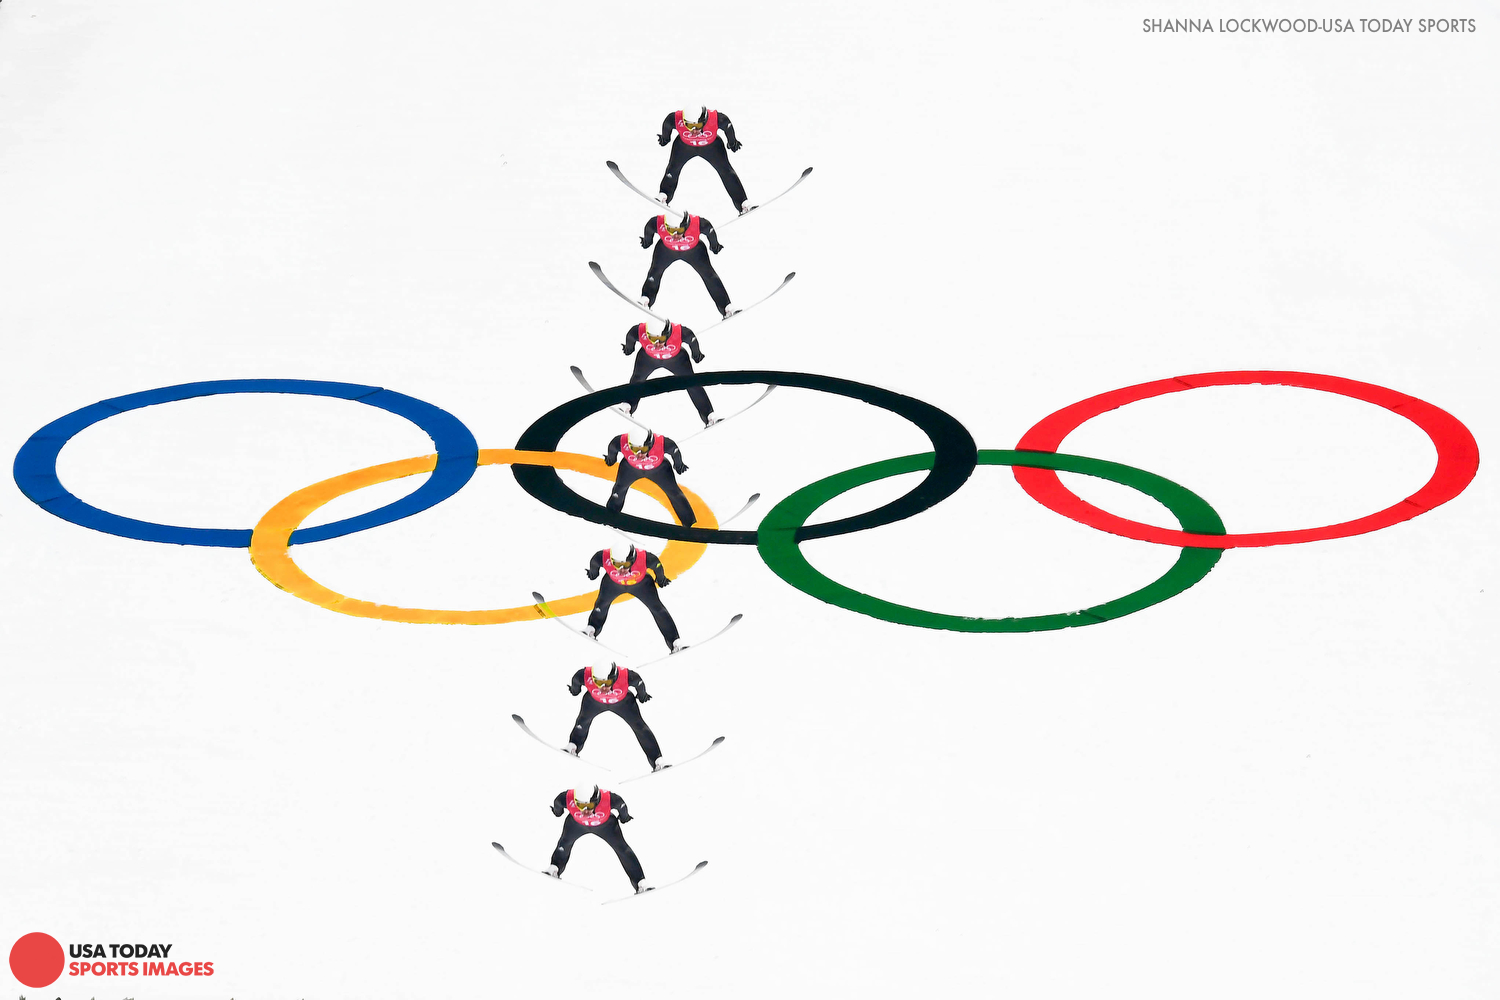  Feb 19, 2018; Pyeongchang, South Korea; Multiple exposure of Jason Lamy Chappuis (FRA) jumping in nordic combined training. Mandatory Credit: Shanna Lockwood-USA TODAY Sports 